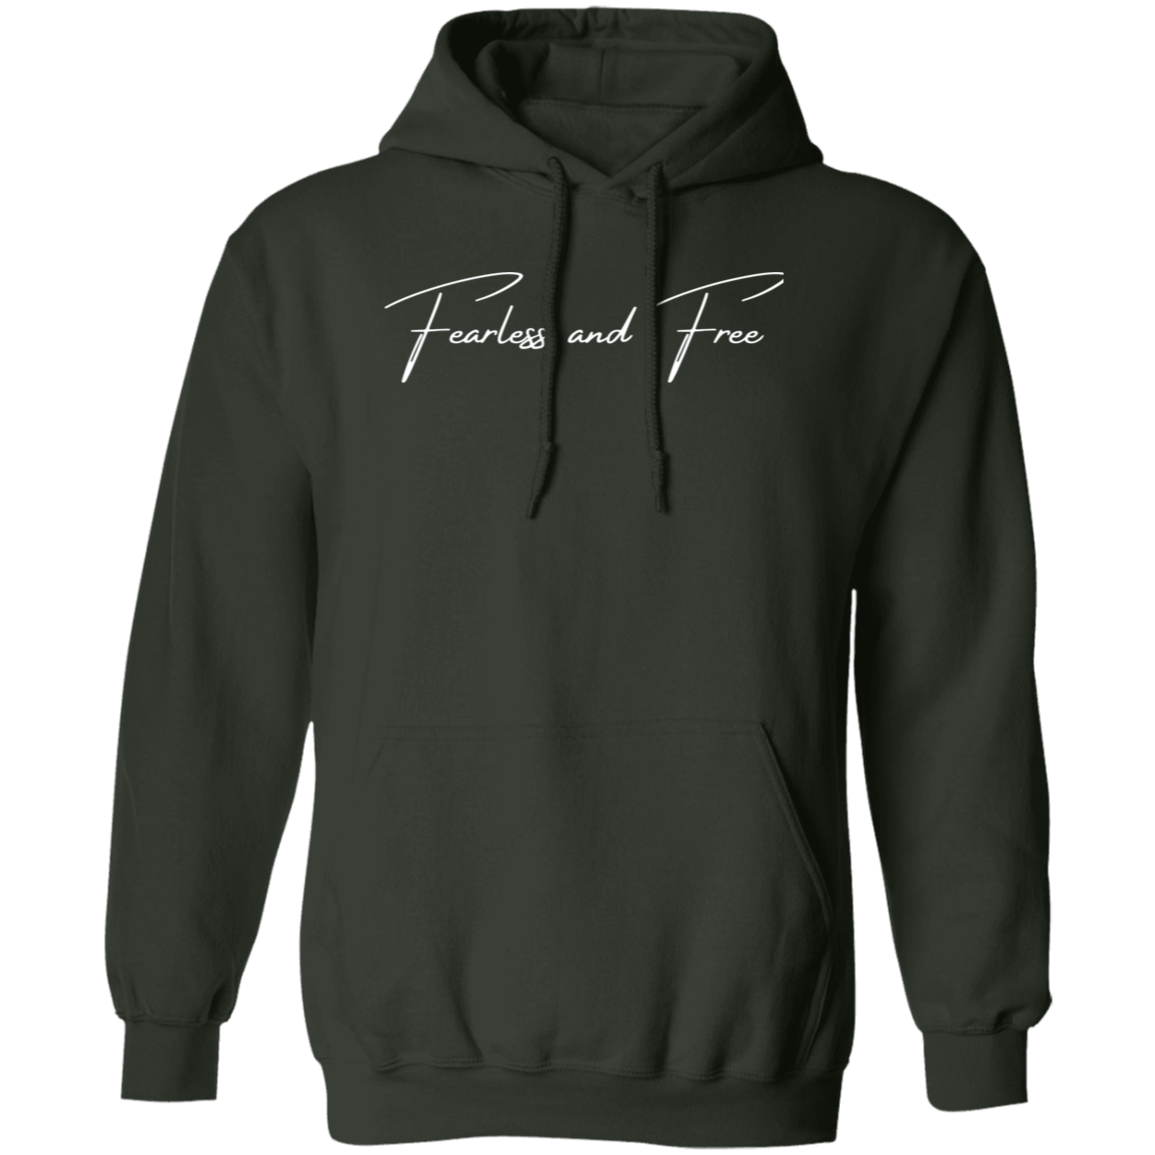 Simply Fearless and Free Hoodie